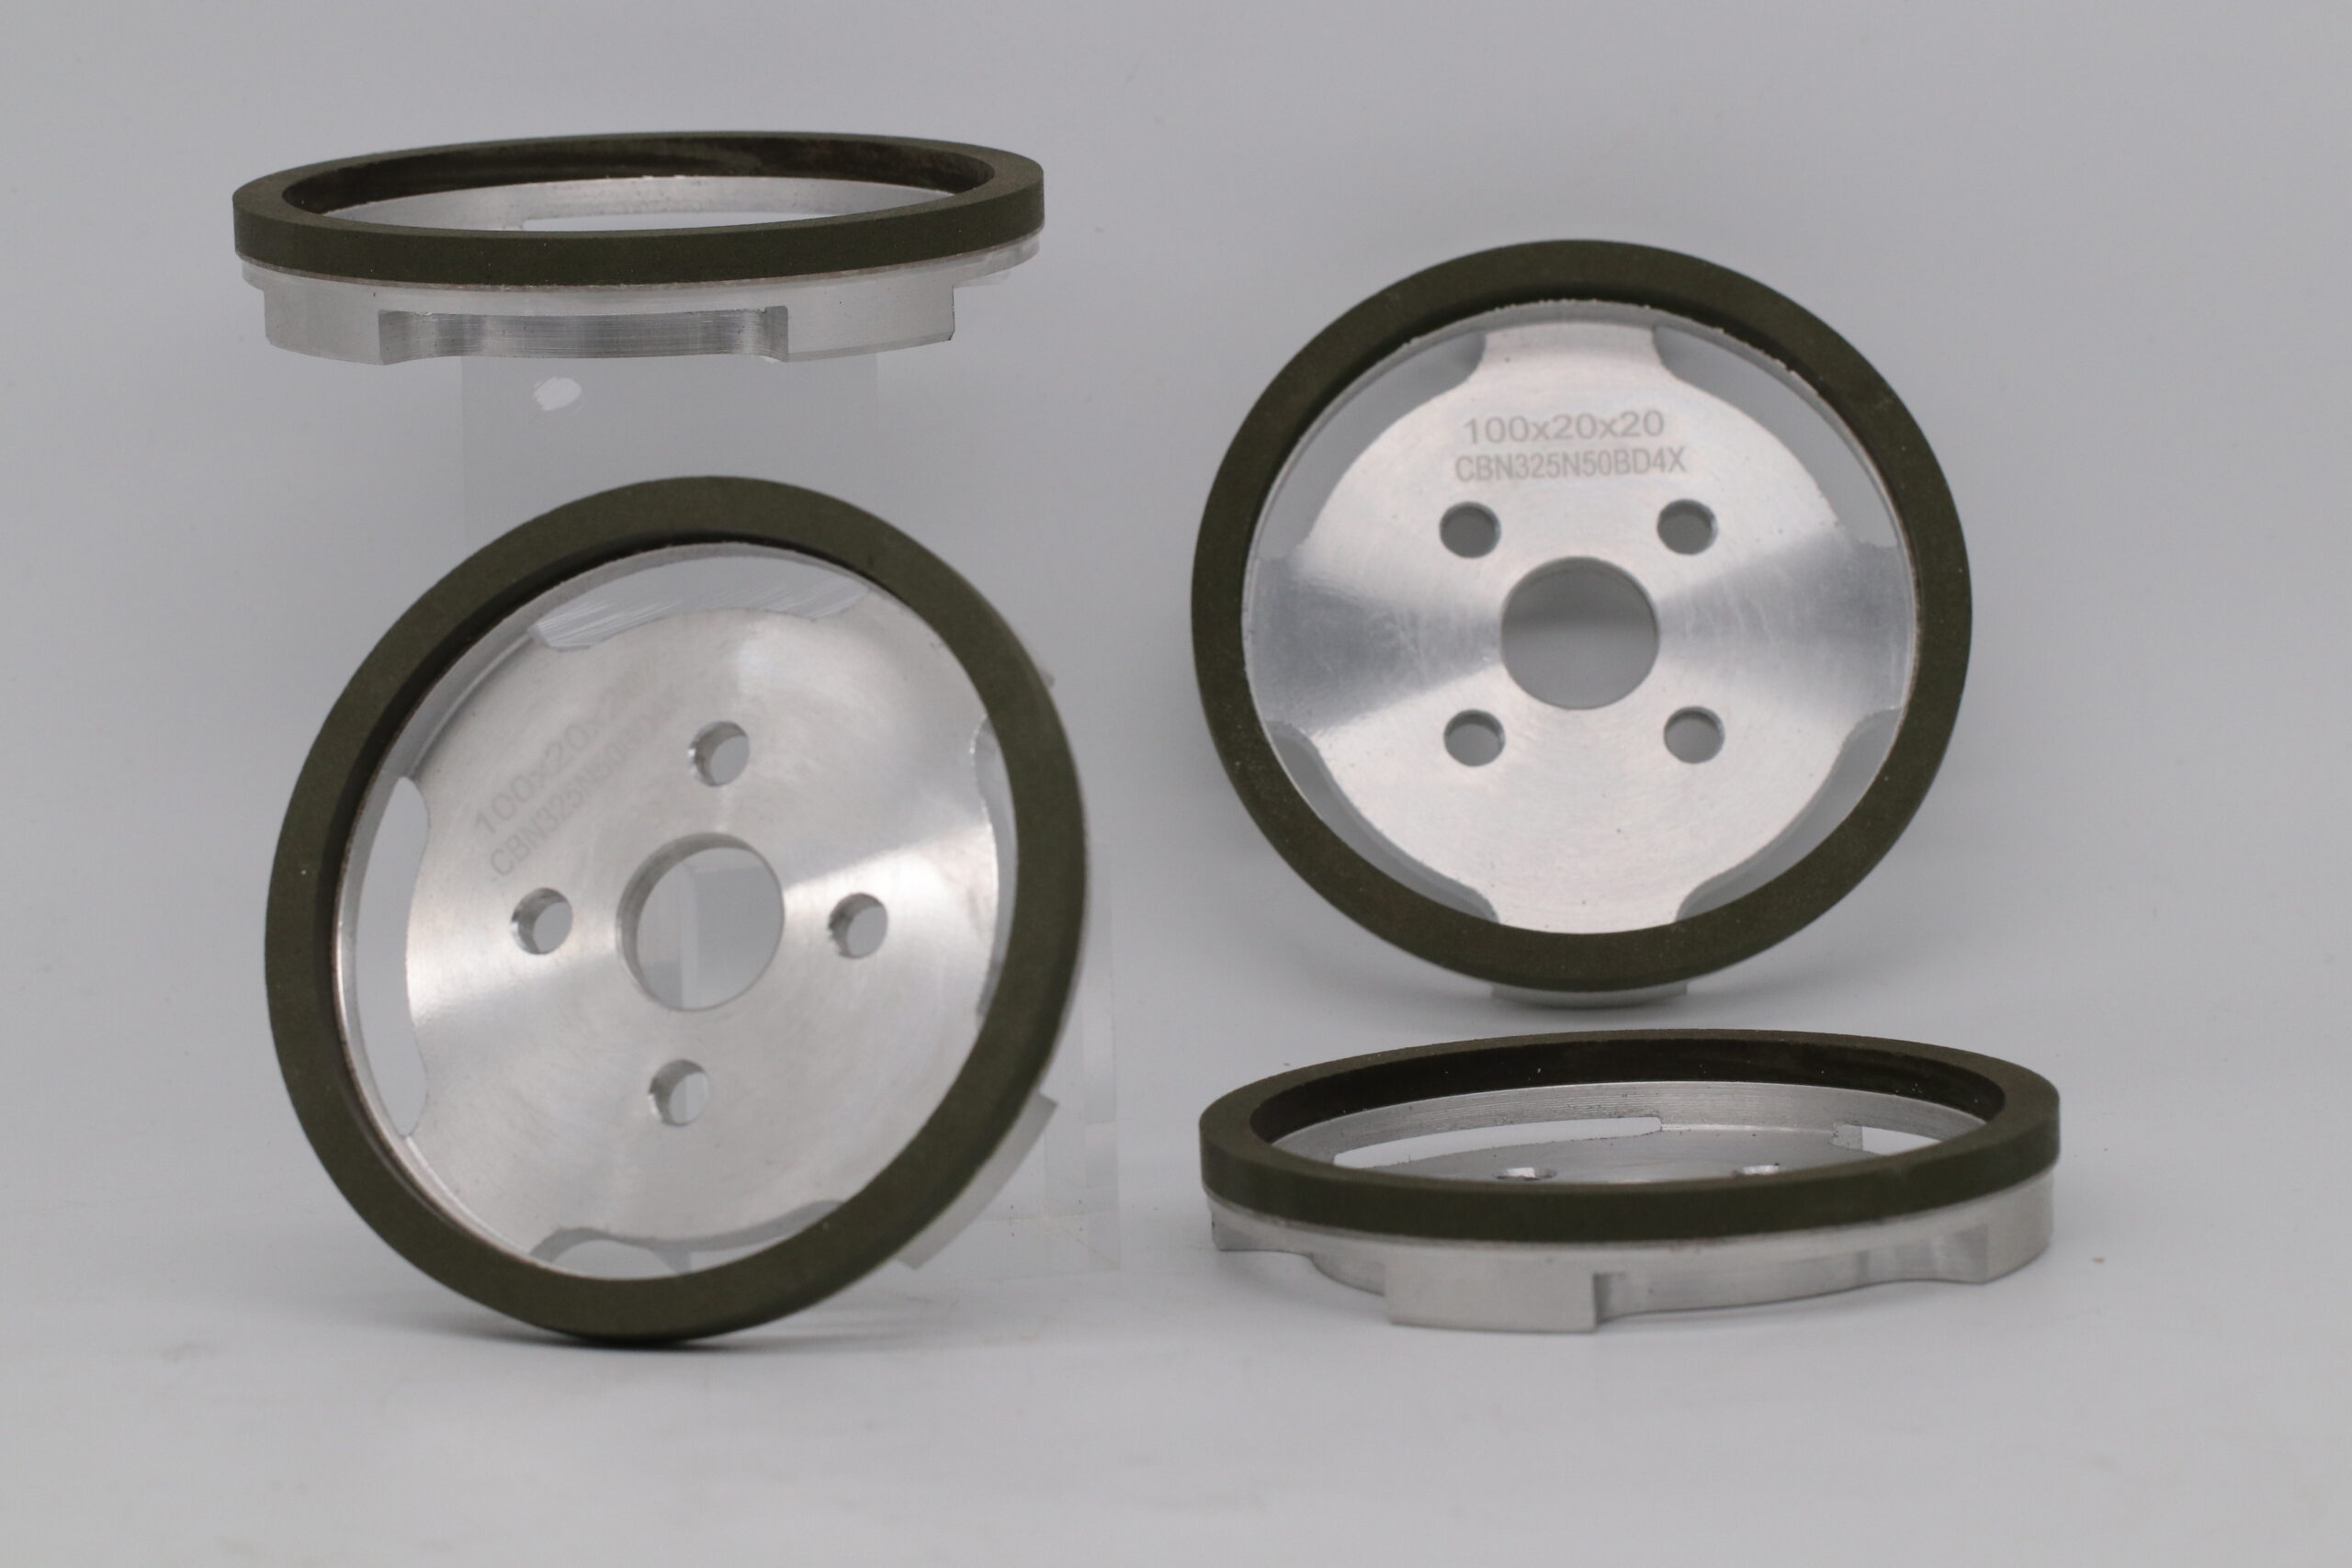 CBN Grinding Wheels for Sale